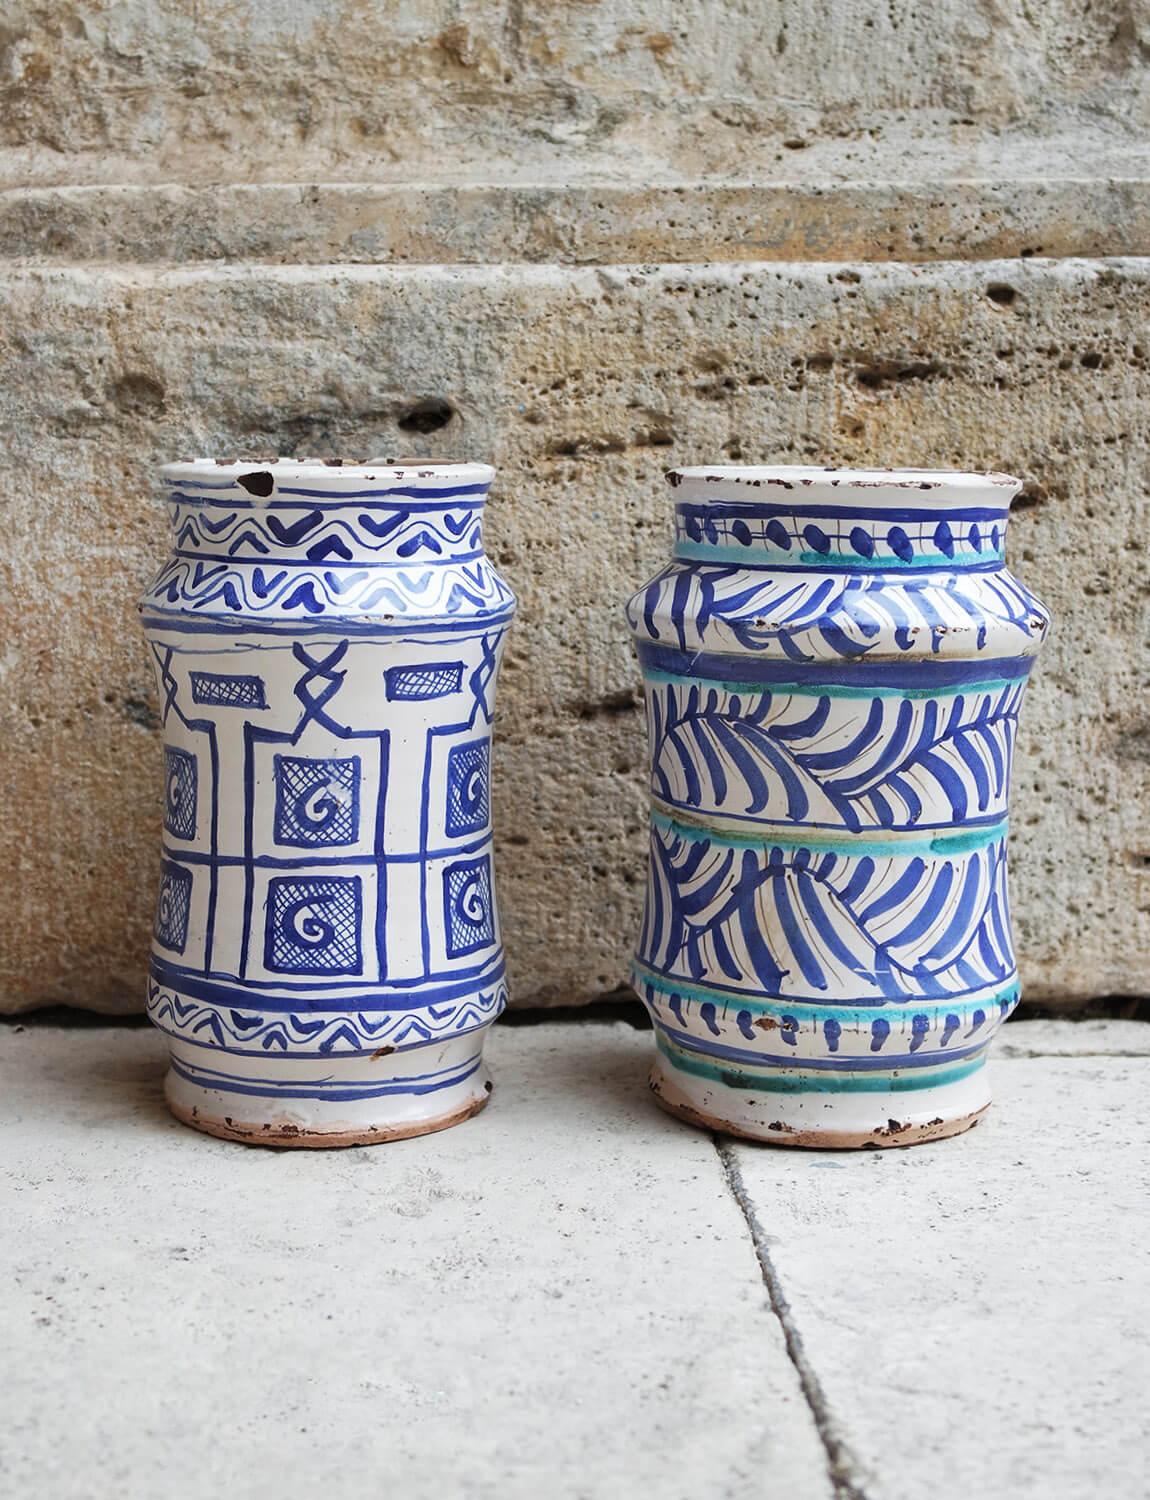 A beautiful and rare pair of maiolica patterned Italian albarelli, late 1800s early 1900s. Found in Palazzo Torlogna in Rome.  Alberelli were ancient storage containers often used in old pharmacies and shops. Their unique shape was designed to fit